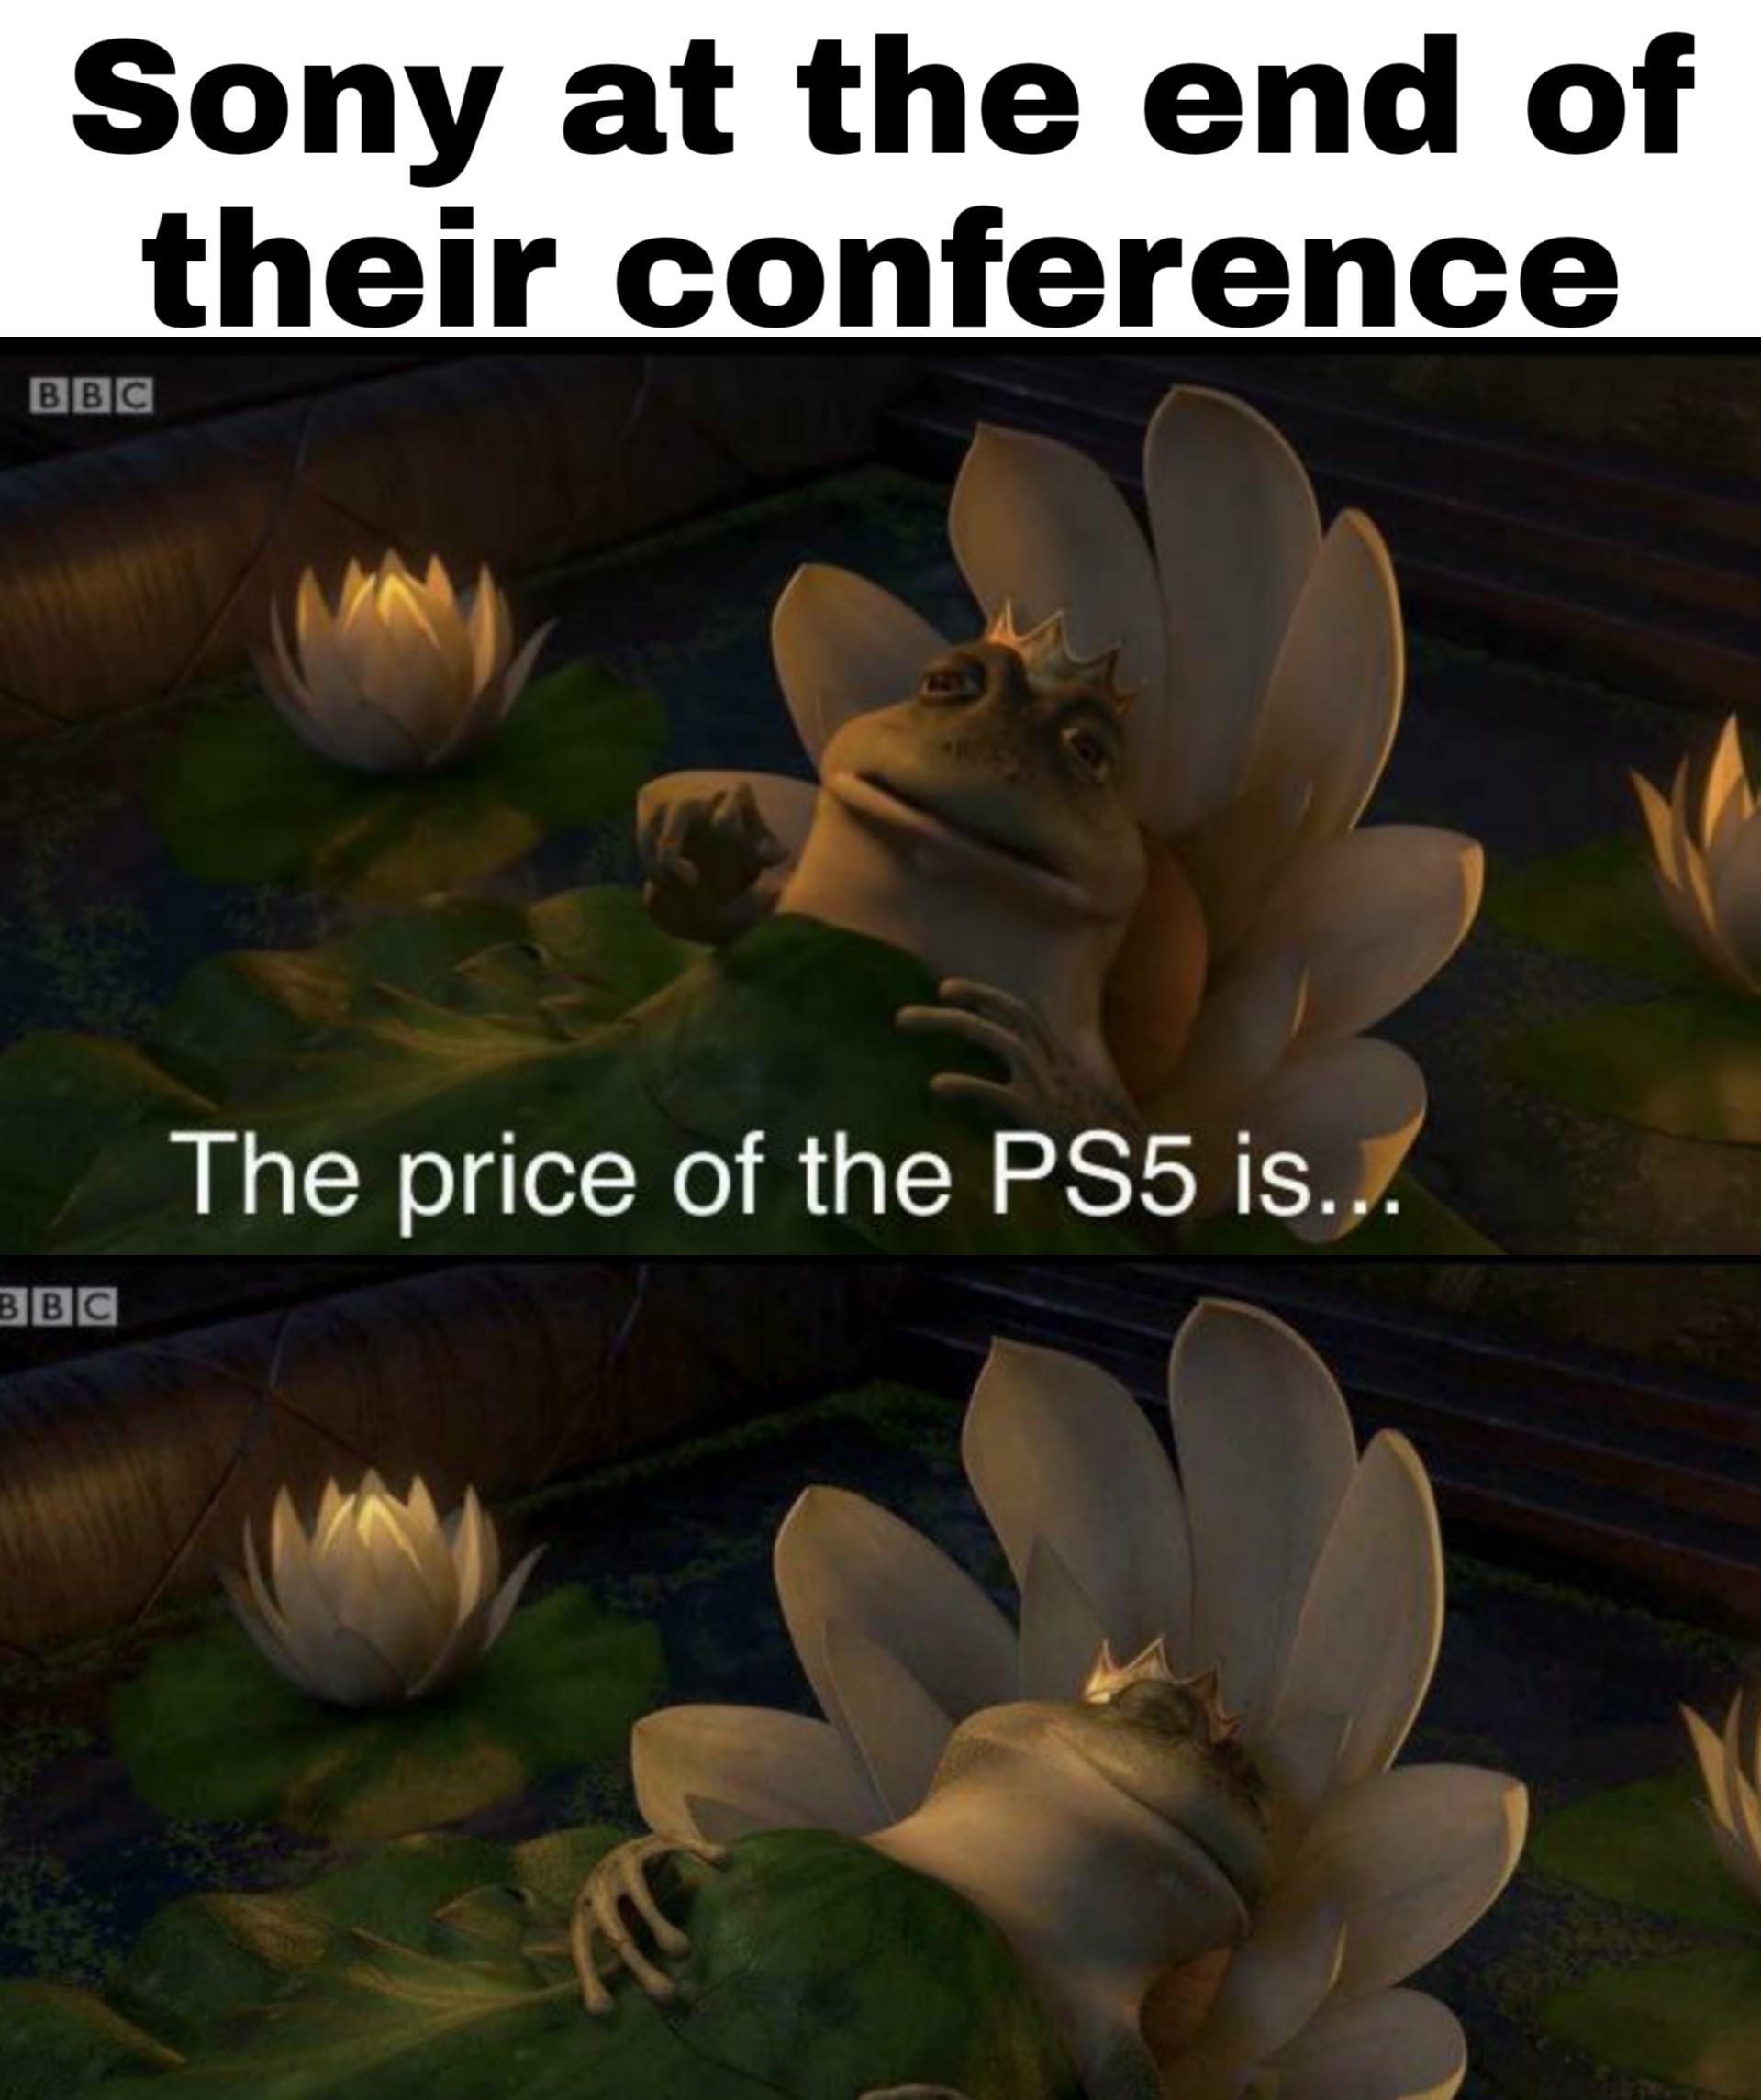 Dank, PC, PS5, Xbox, PS3, PS4 Dank Memes Dank, PC, PS5, Xbox, PS3, PS4 text: Sony at the end of their conference The price of the PS5 is.. 